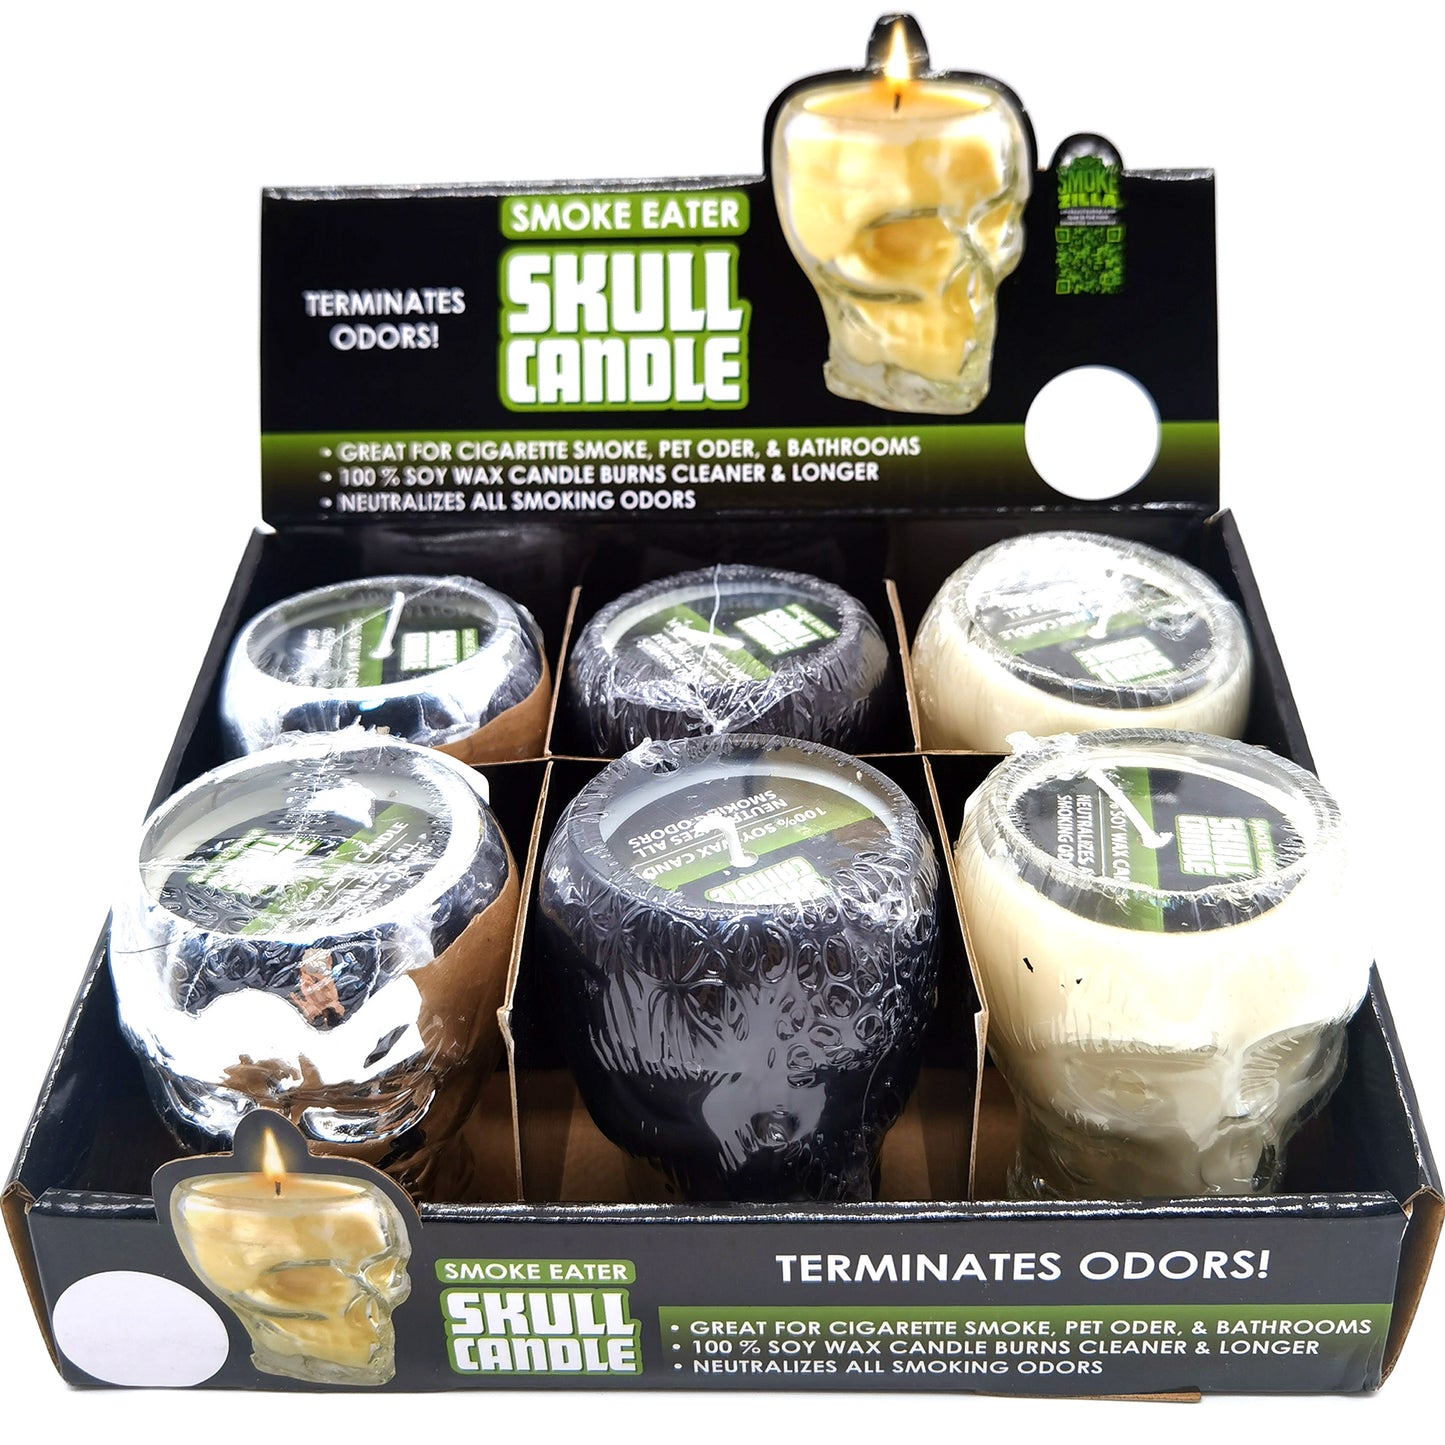 ITEM NUMBER 022543 SKULL SMOKERS CANDLE 6 PIECES PER DISPLAY